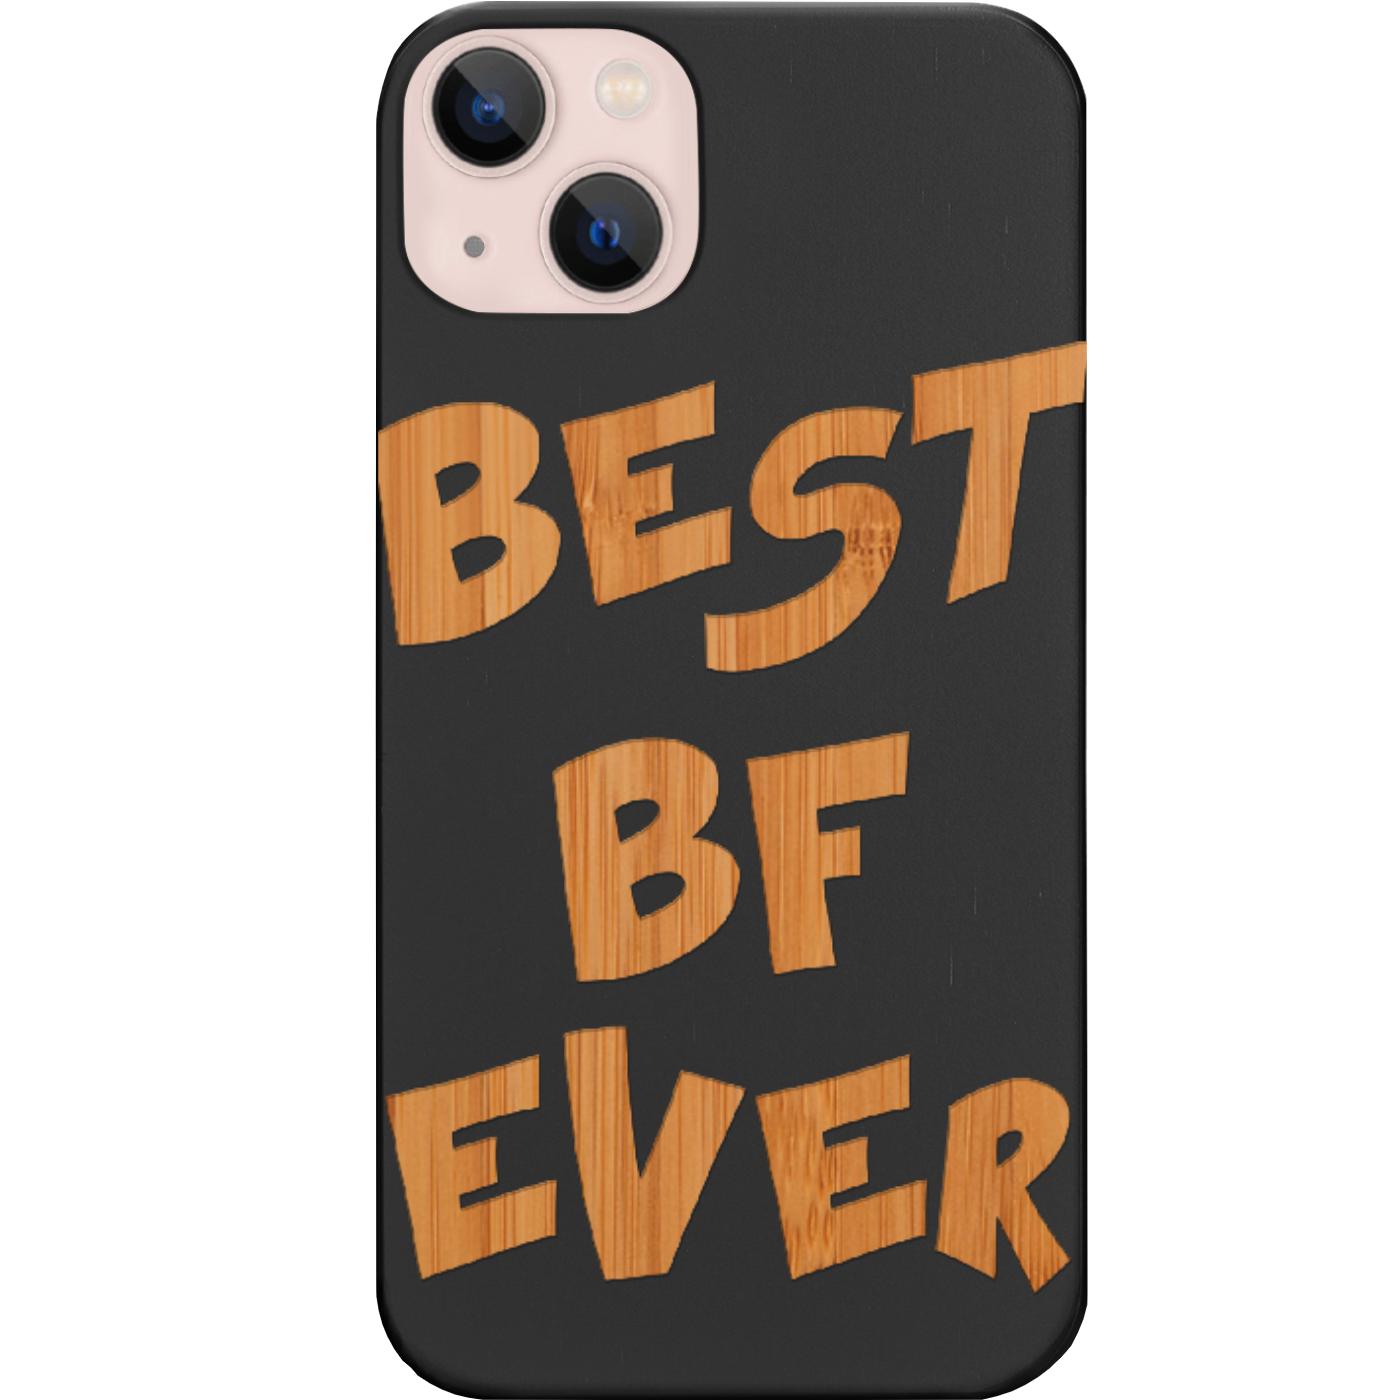 Best Bf Ever - Engraved Phone Case